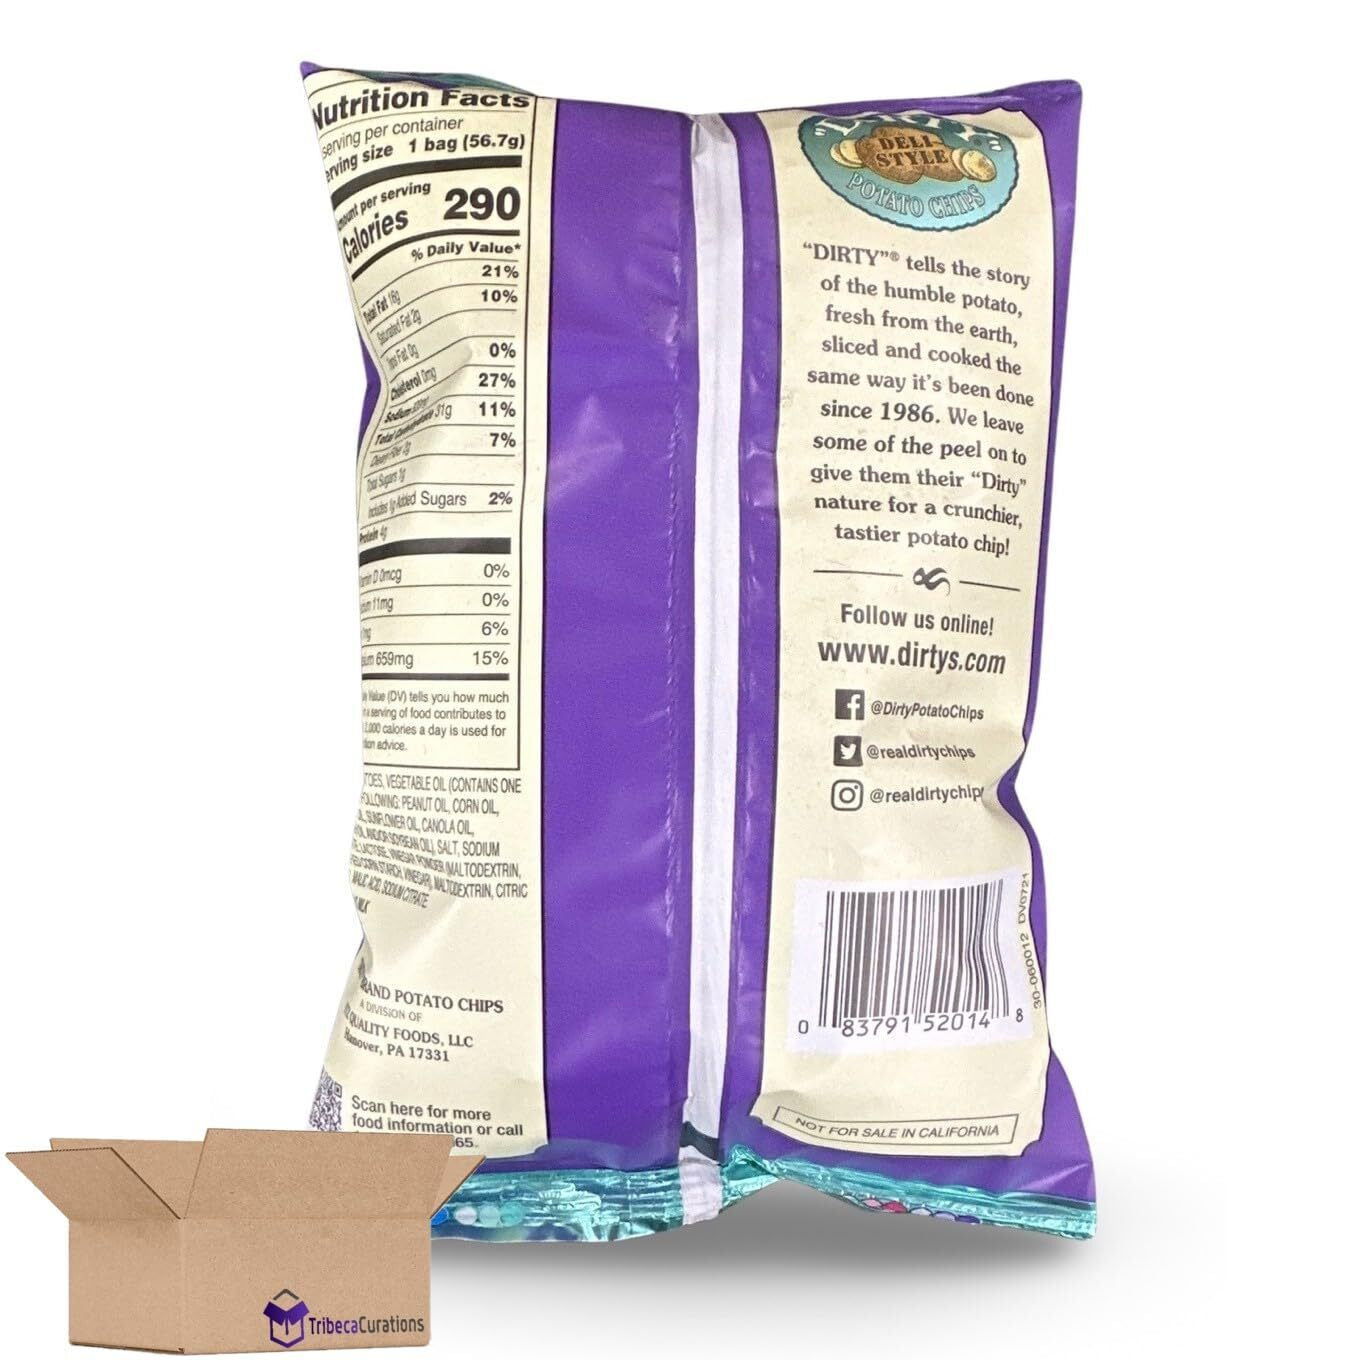 Deli Style Potato Chips Value Pack | Bundled by Tribeca Curations, Sea Salt &